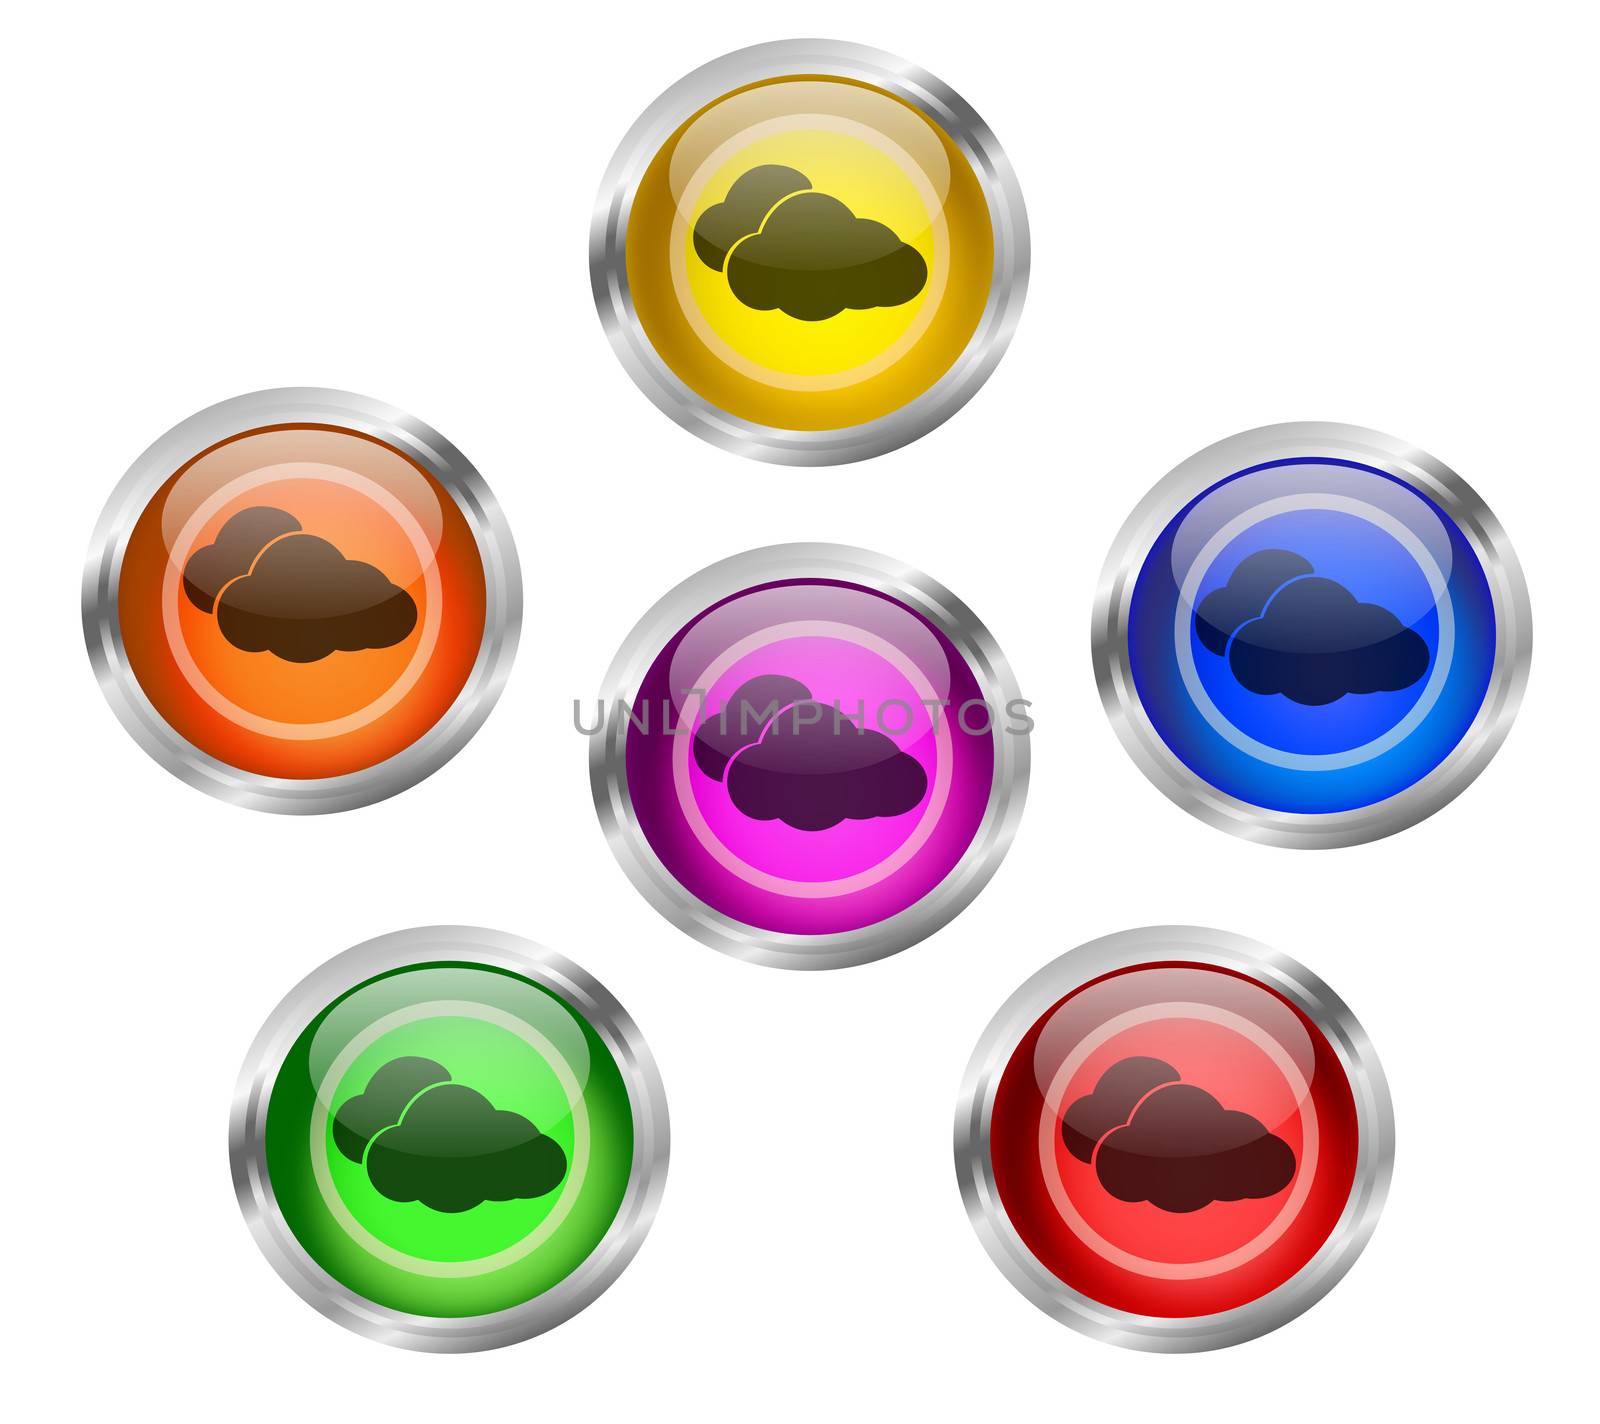 Set of shiny cloud icon buttons
